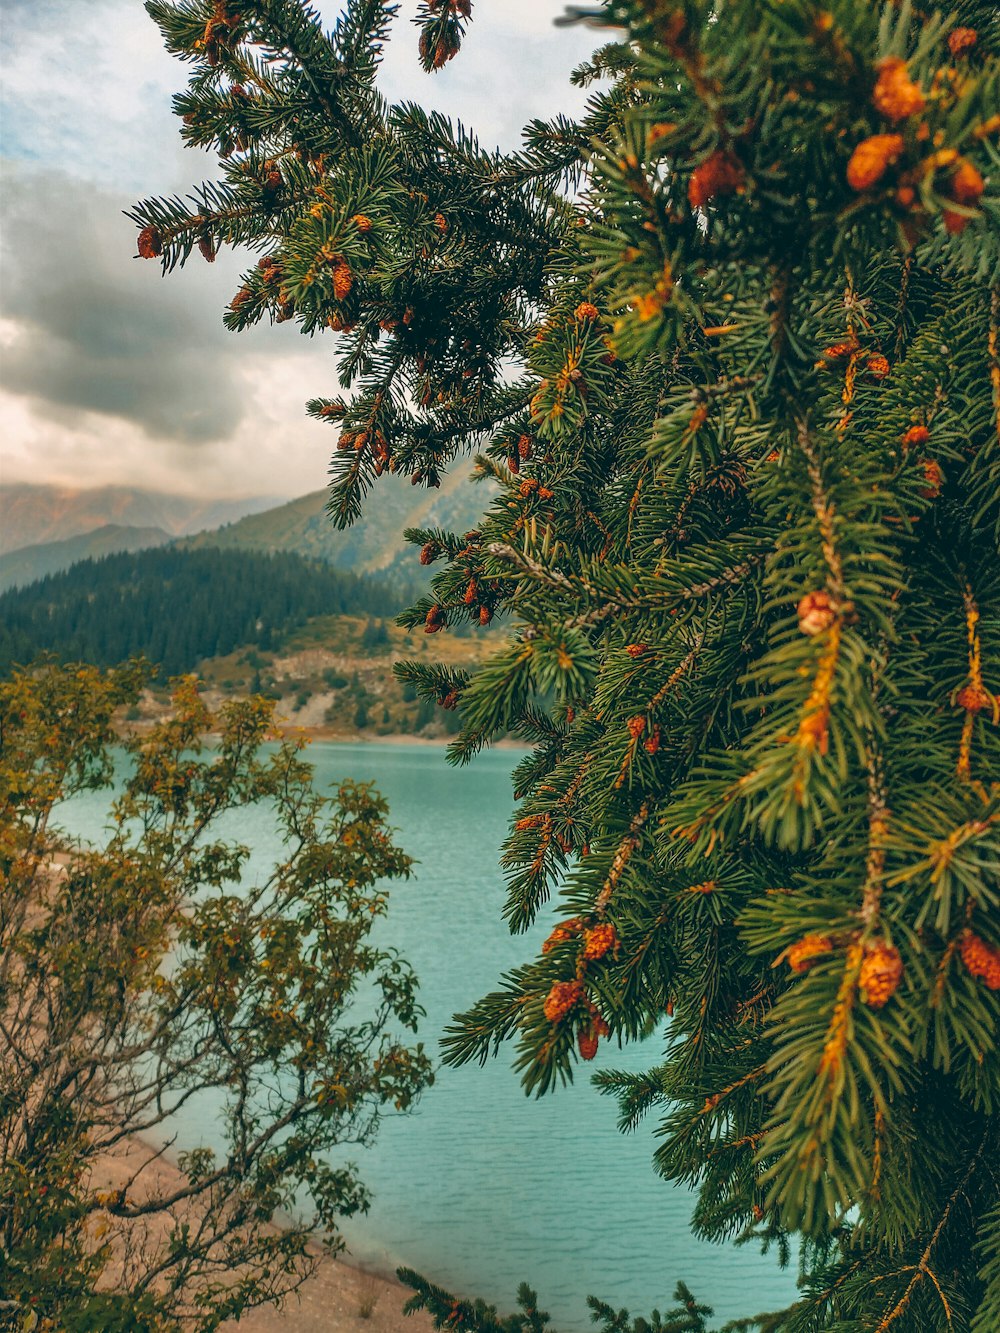 green pine tree near lake under cloudy sky during daytime